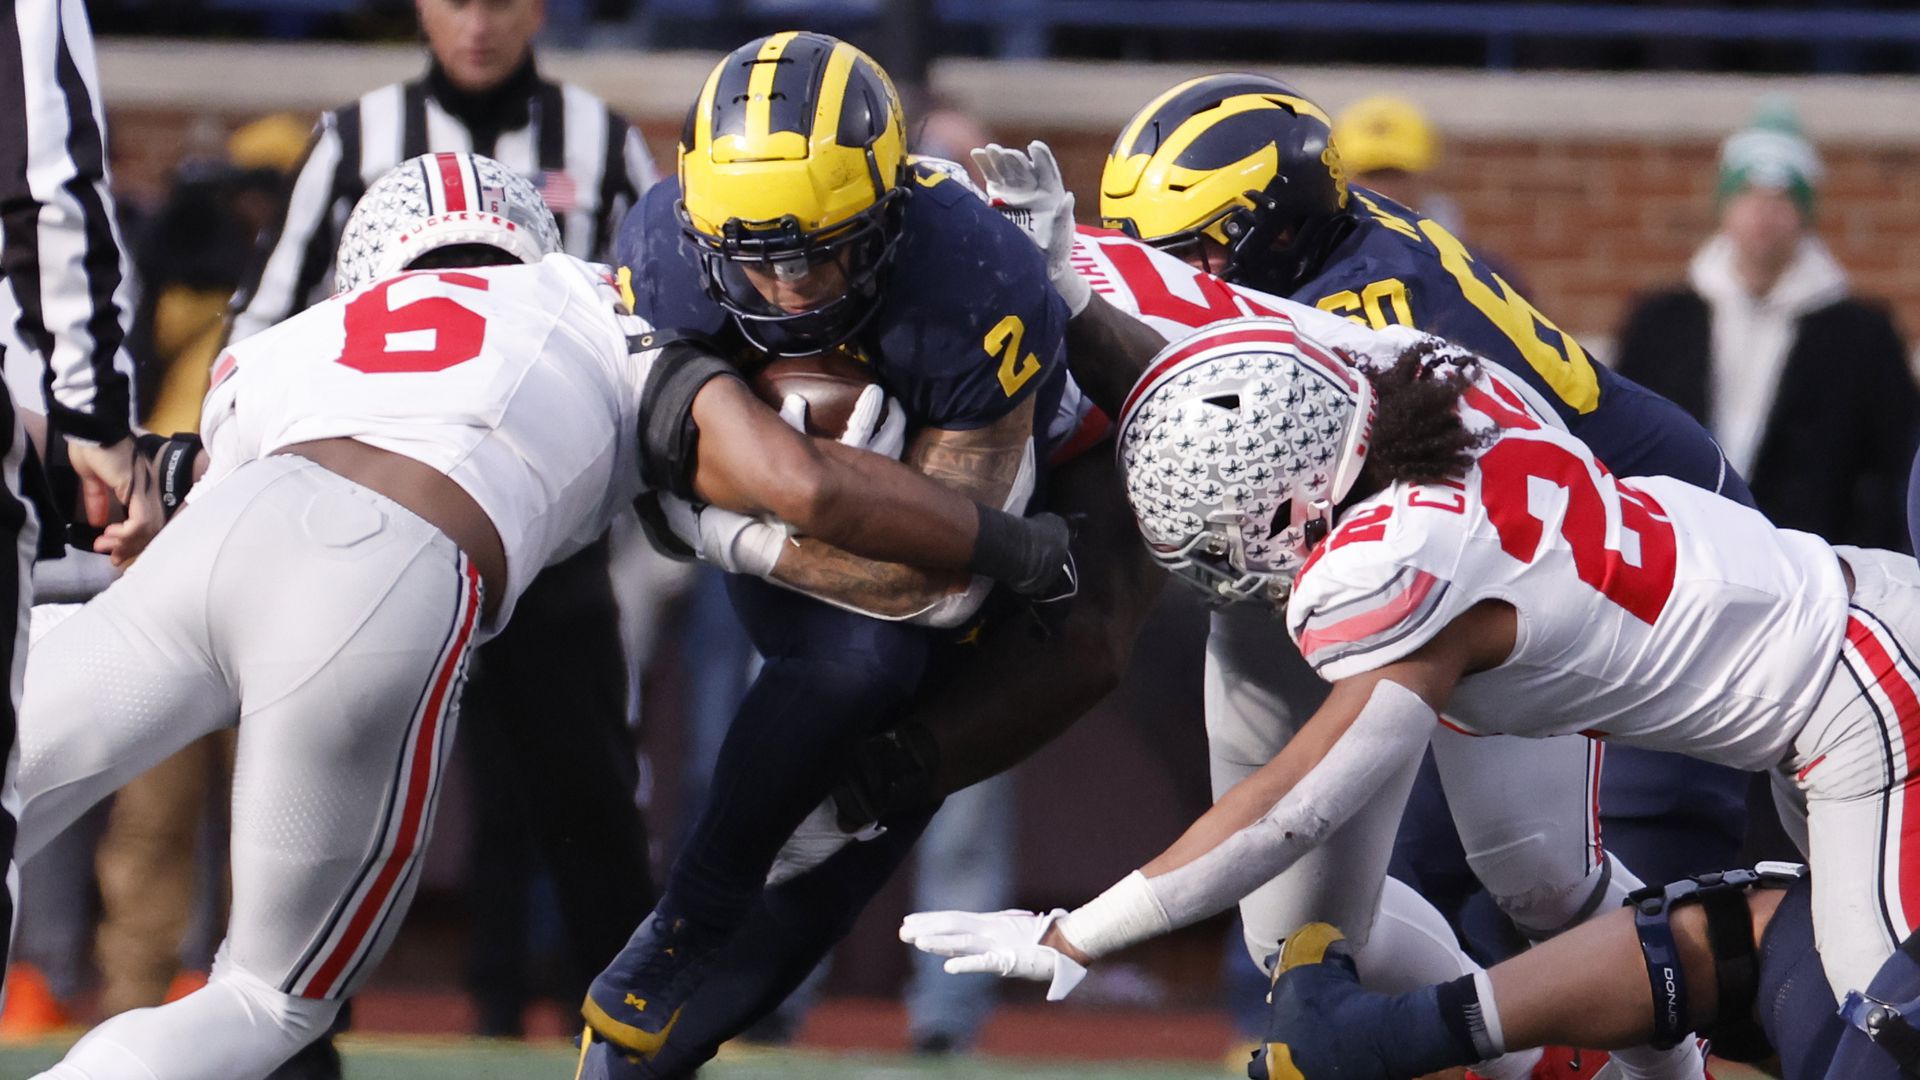 college football playoff rankings: new final 4 revealed after michigan wins ‘the game’